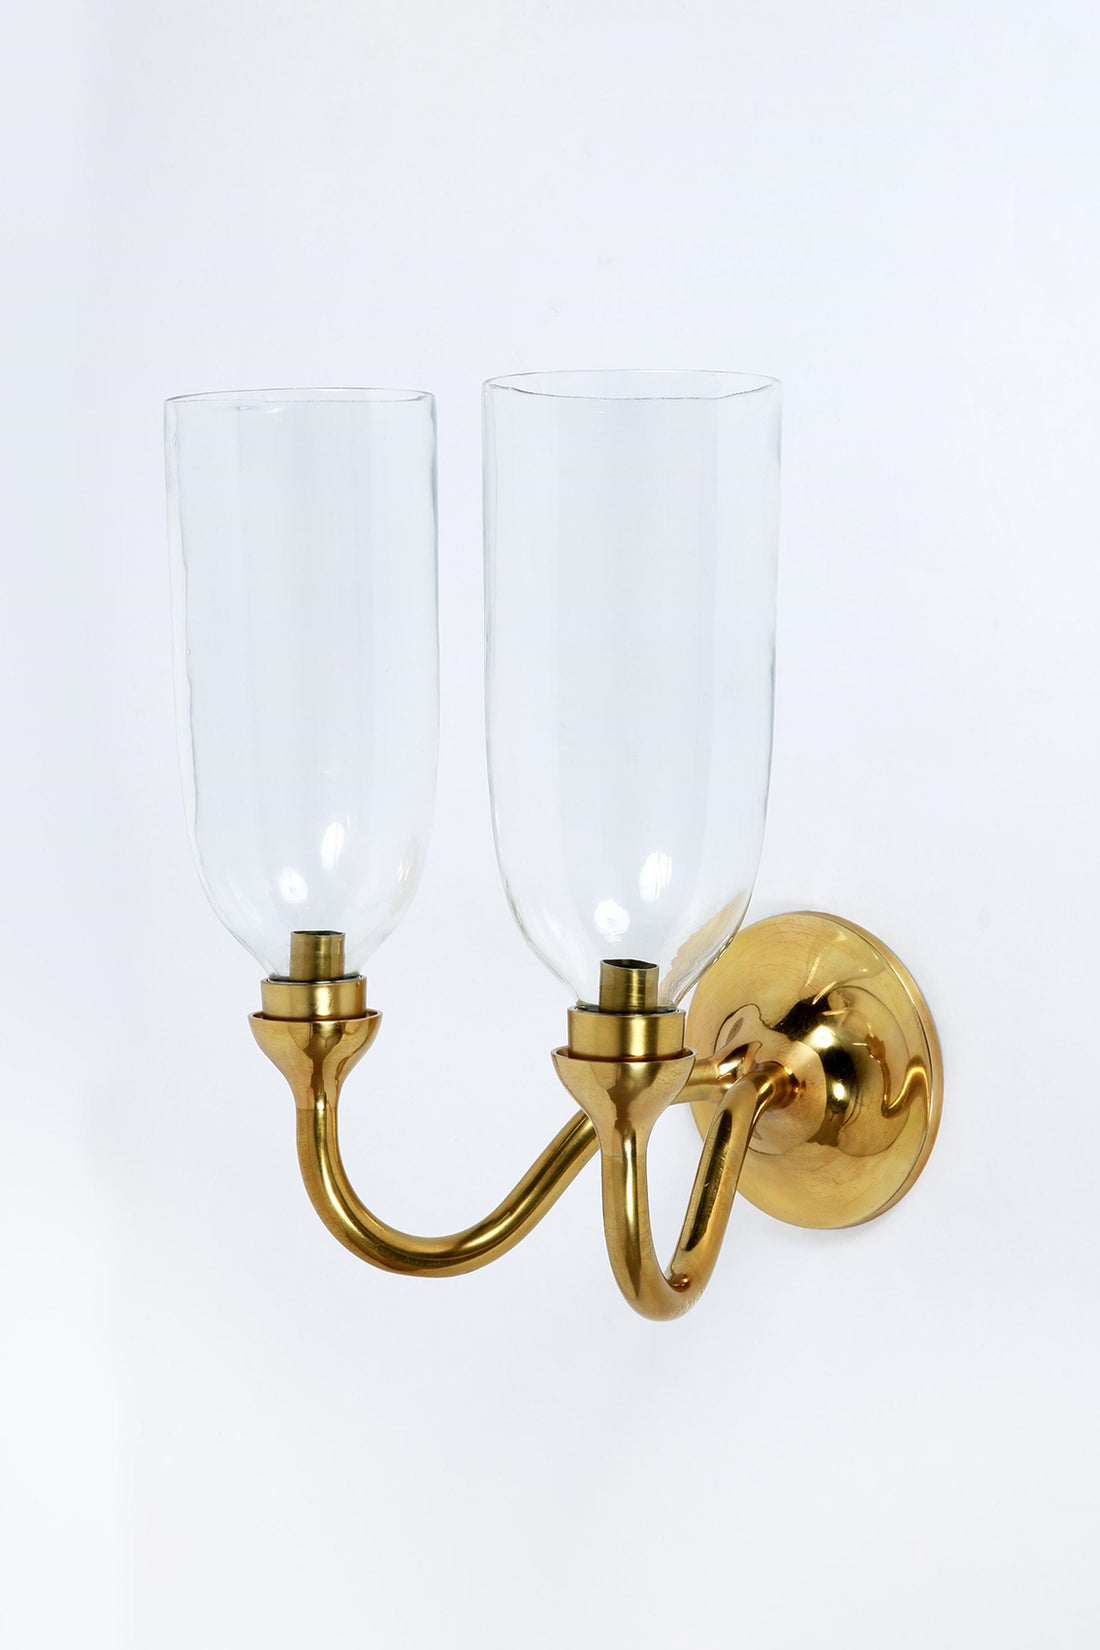 Rose Uniacke Curved Double Arm Wall Light for Dunlin